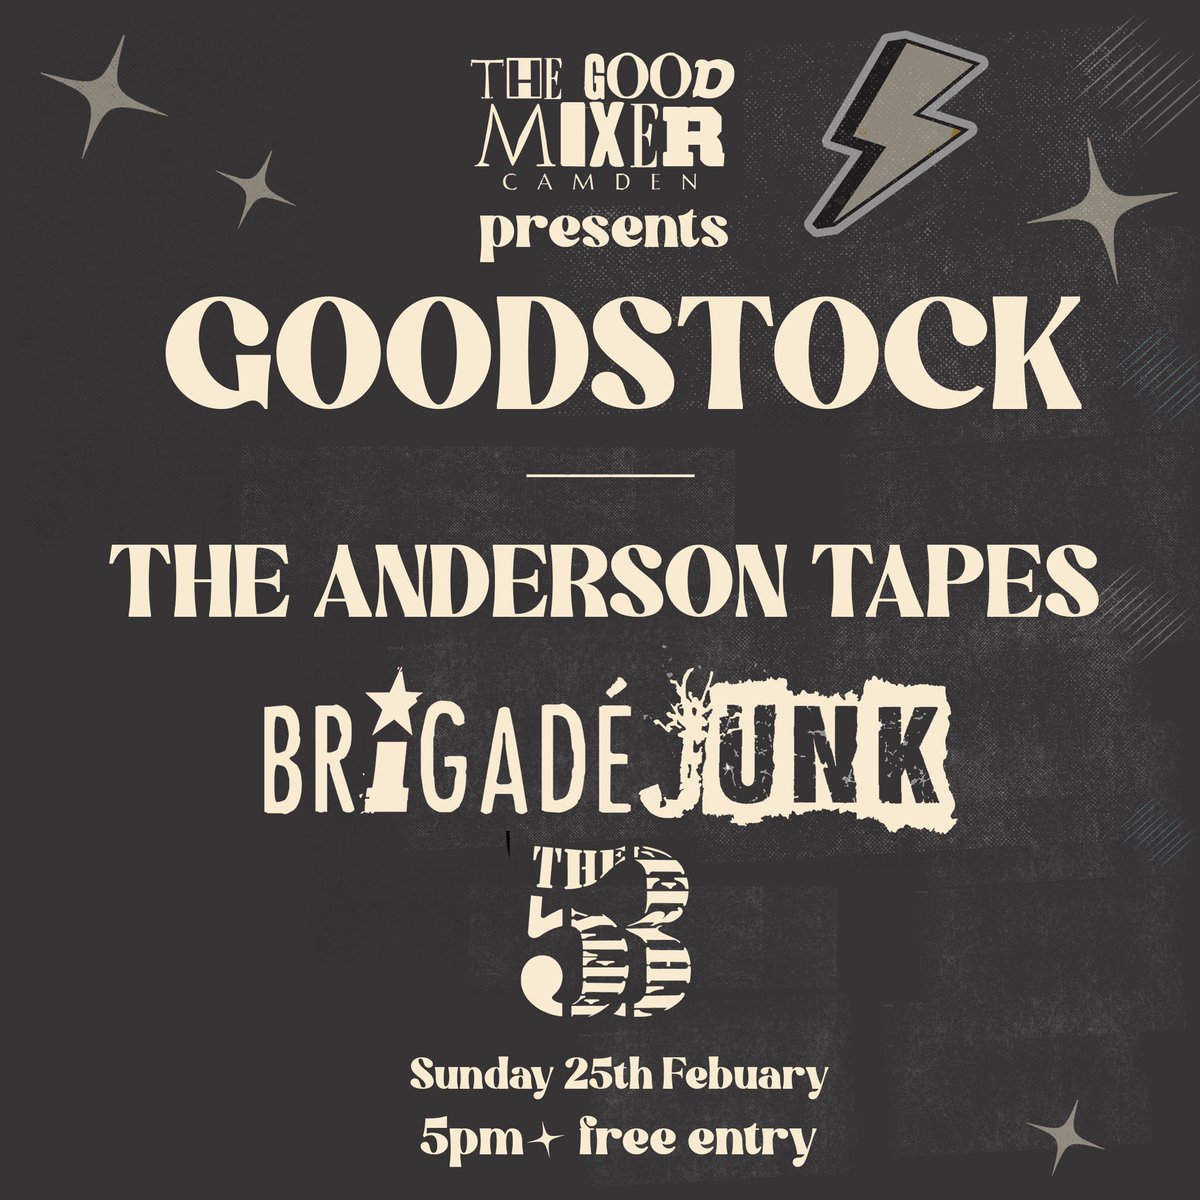 We are playing at the Good Mixer in Camden on Sunday with two brilliant bands - @BrigadeJunk and The 53.